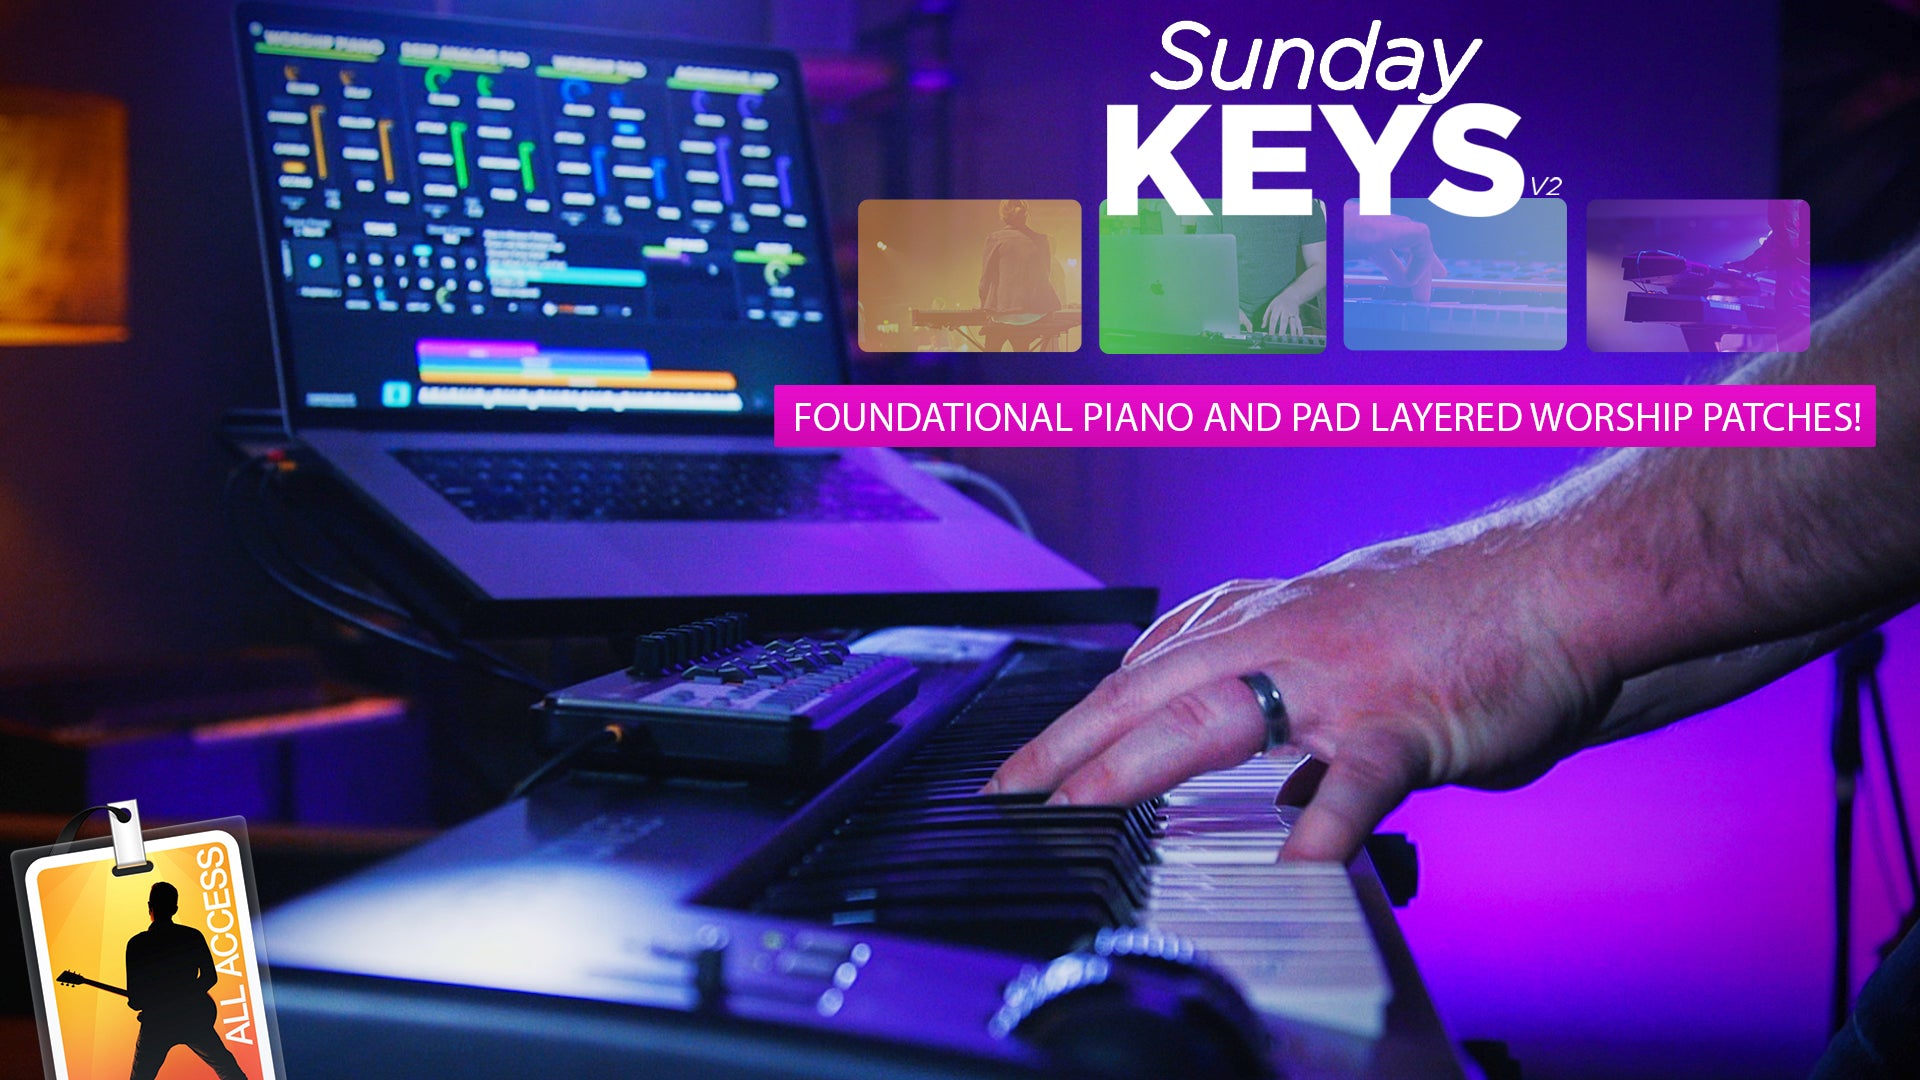 Foundational Piano and Pad Layered Worship Patches Demo - Sunday Keys Version 2